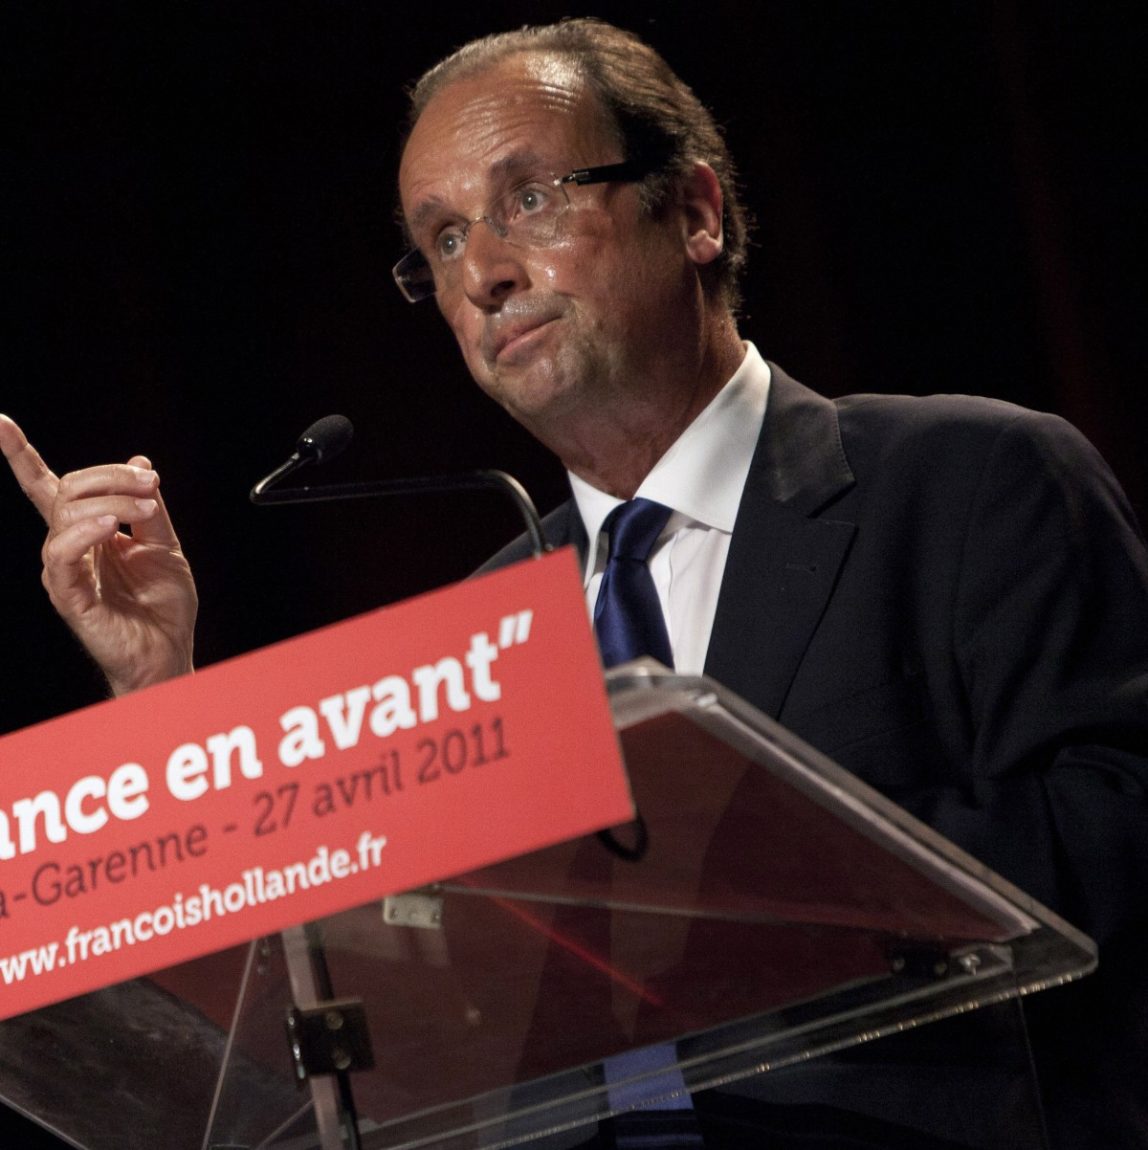 French Socialist Party former first secretary and candidate for the party's primary elections for the 2012 presidential election Francois Hollande gestures as he delivers a speech during his first campaign rally in Clichy, east of Paris, Wednesday, April 27, 2011. Hollande recently won the majority of votes in the first round of elections in France. (AP Photo/Thibault Camus)